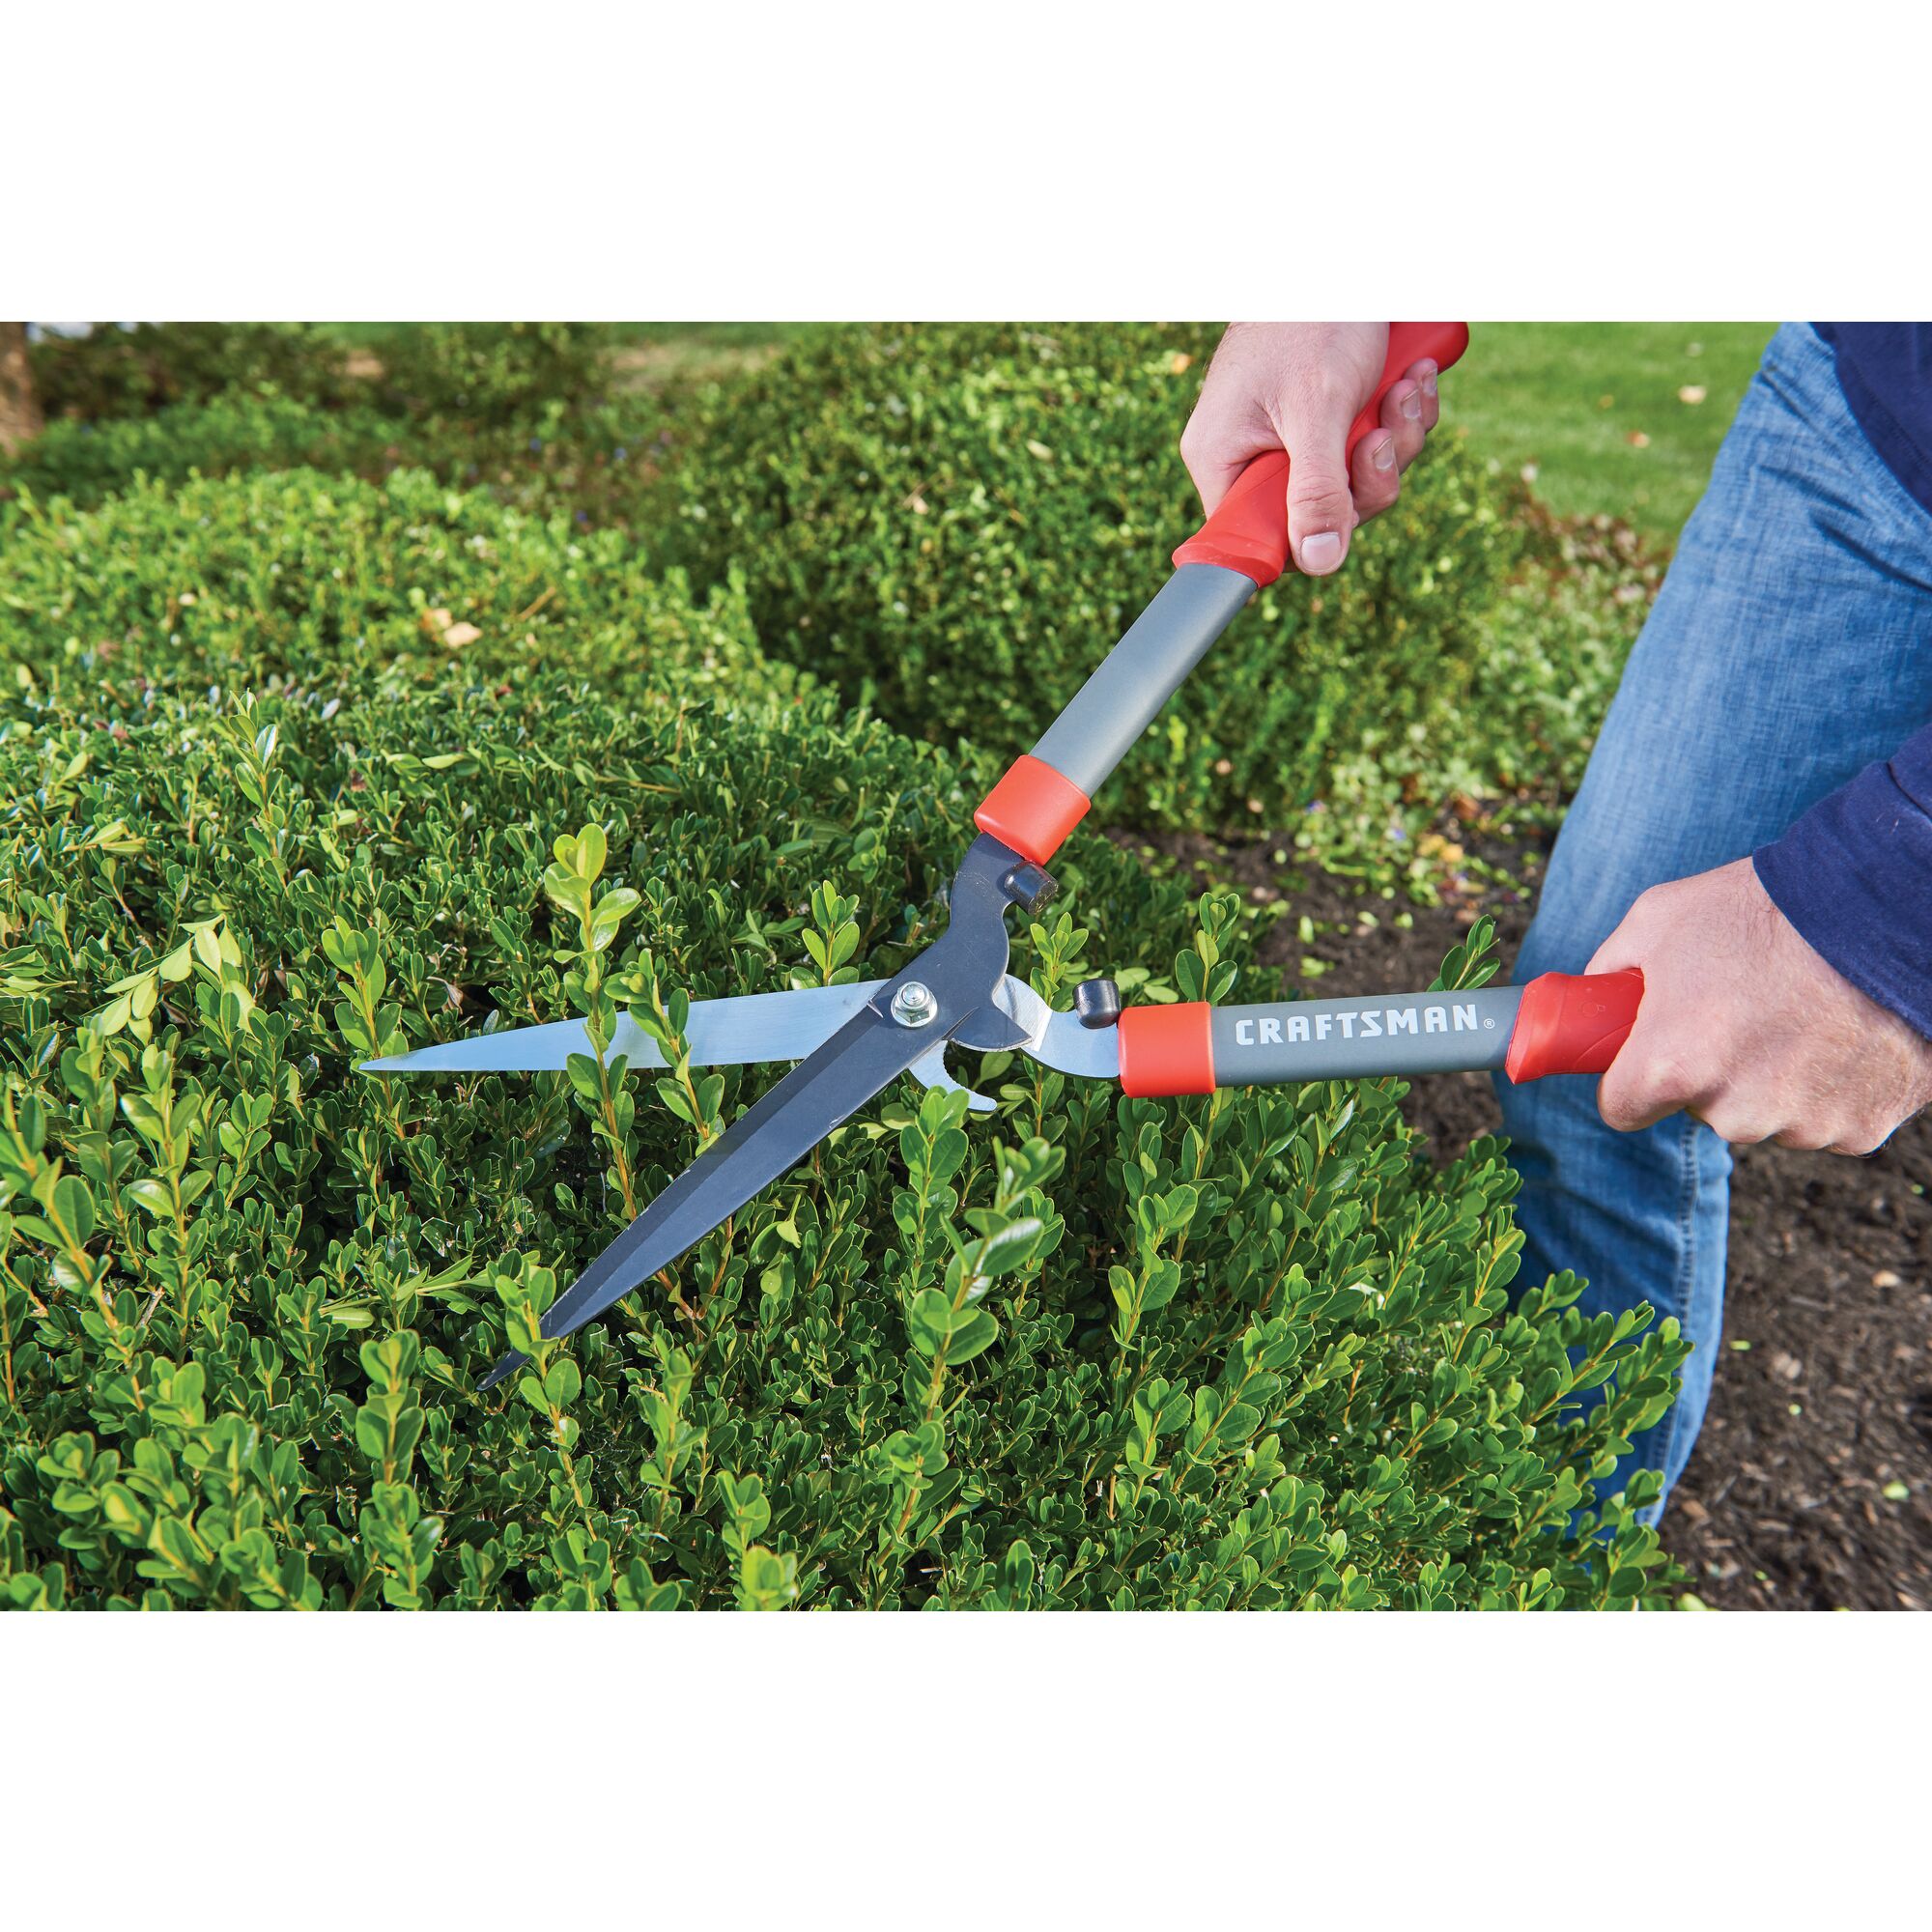 Multi purpose hedge shears being used by a person to trim a hedge.